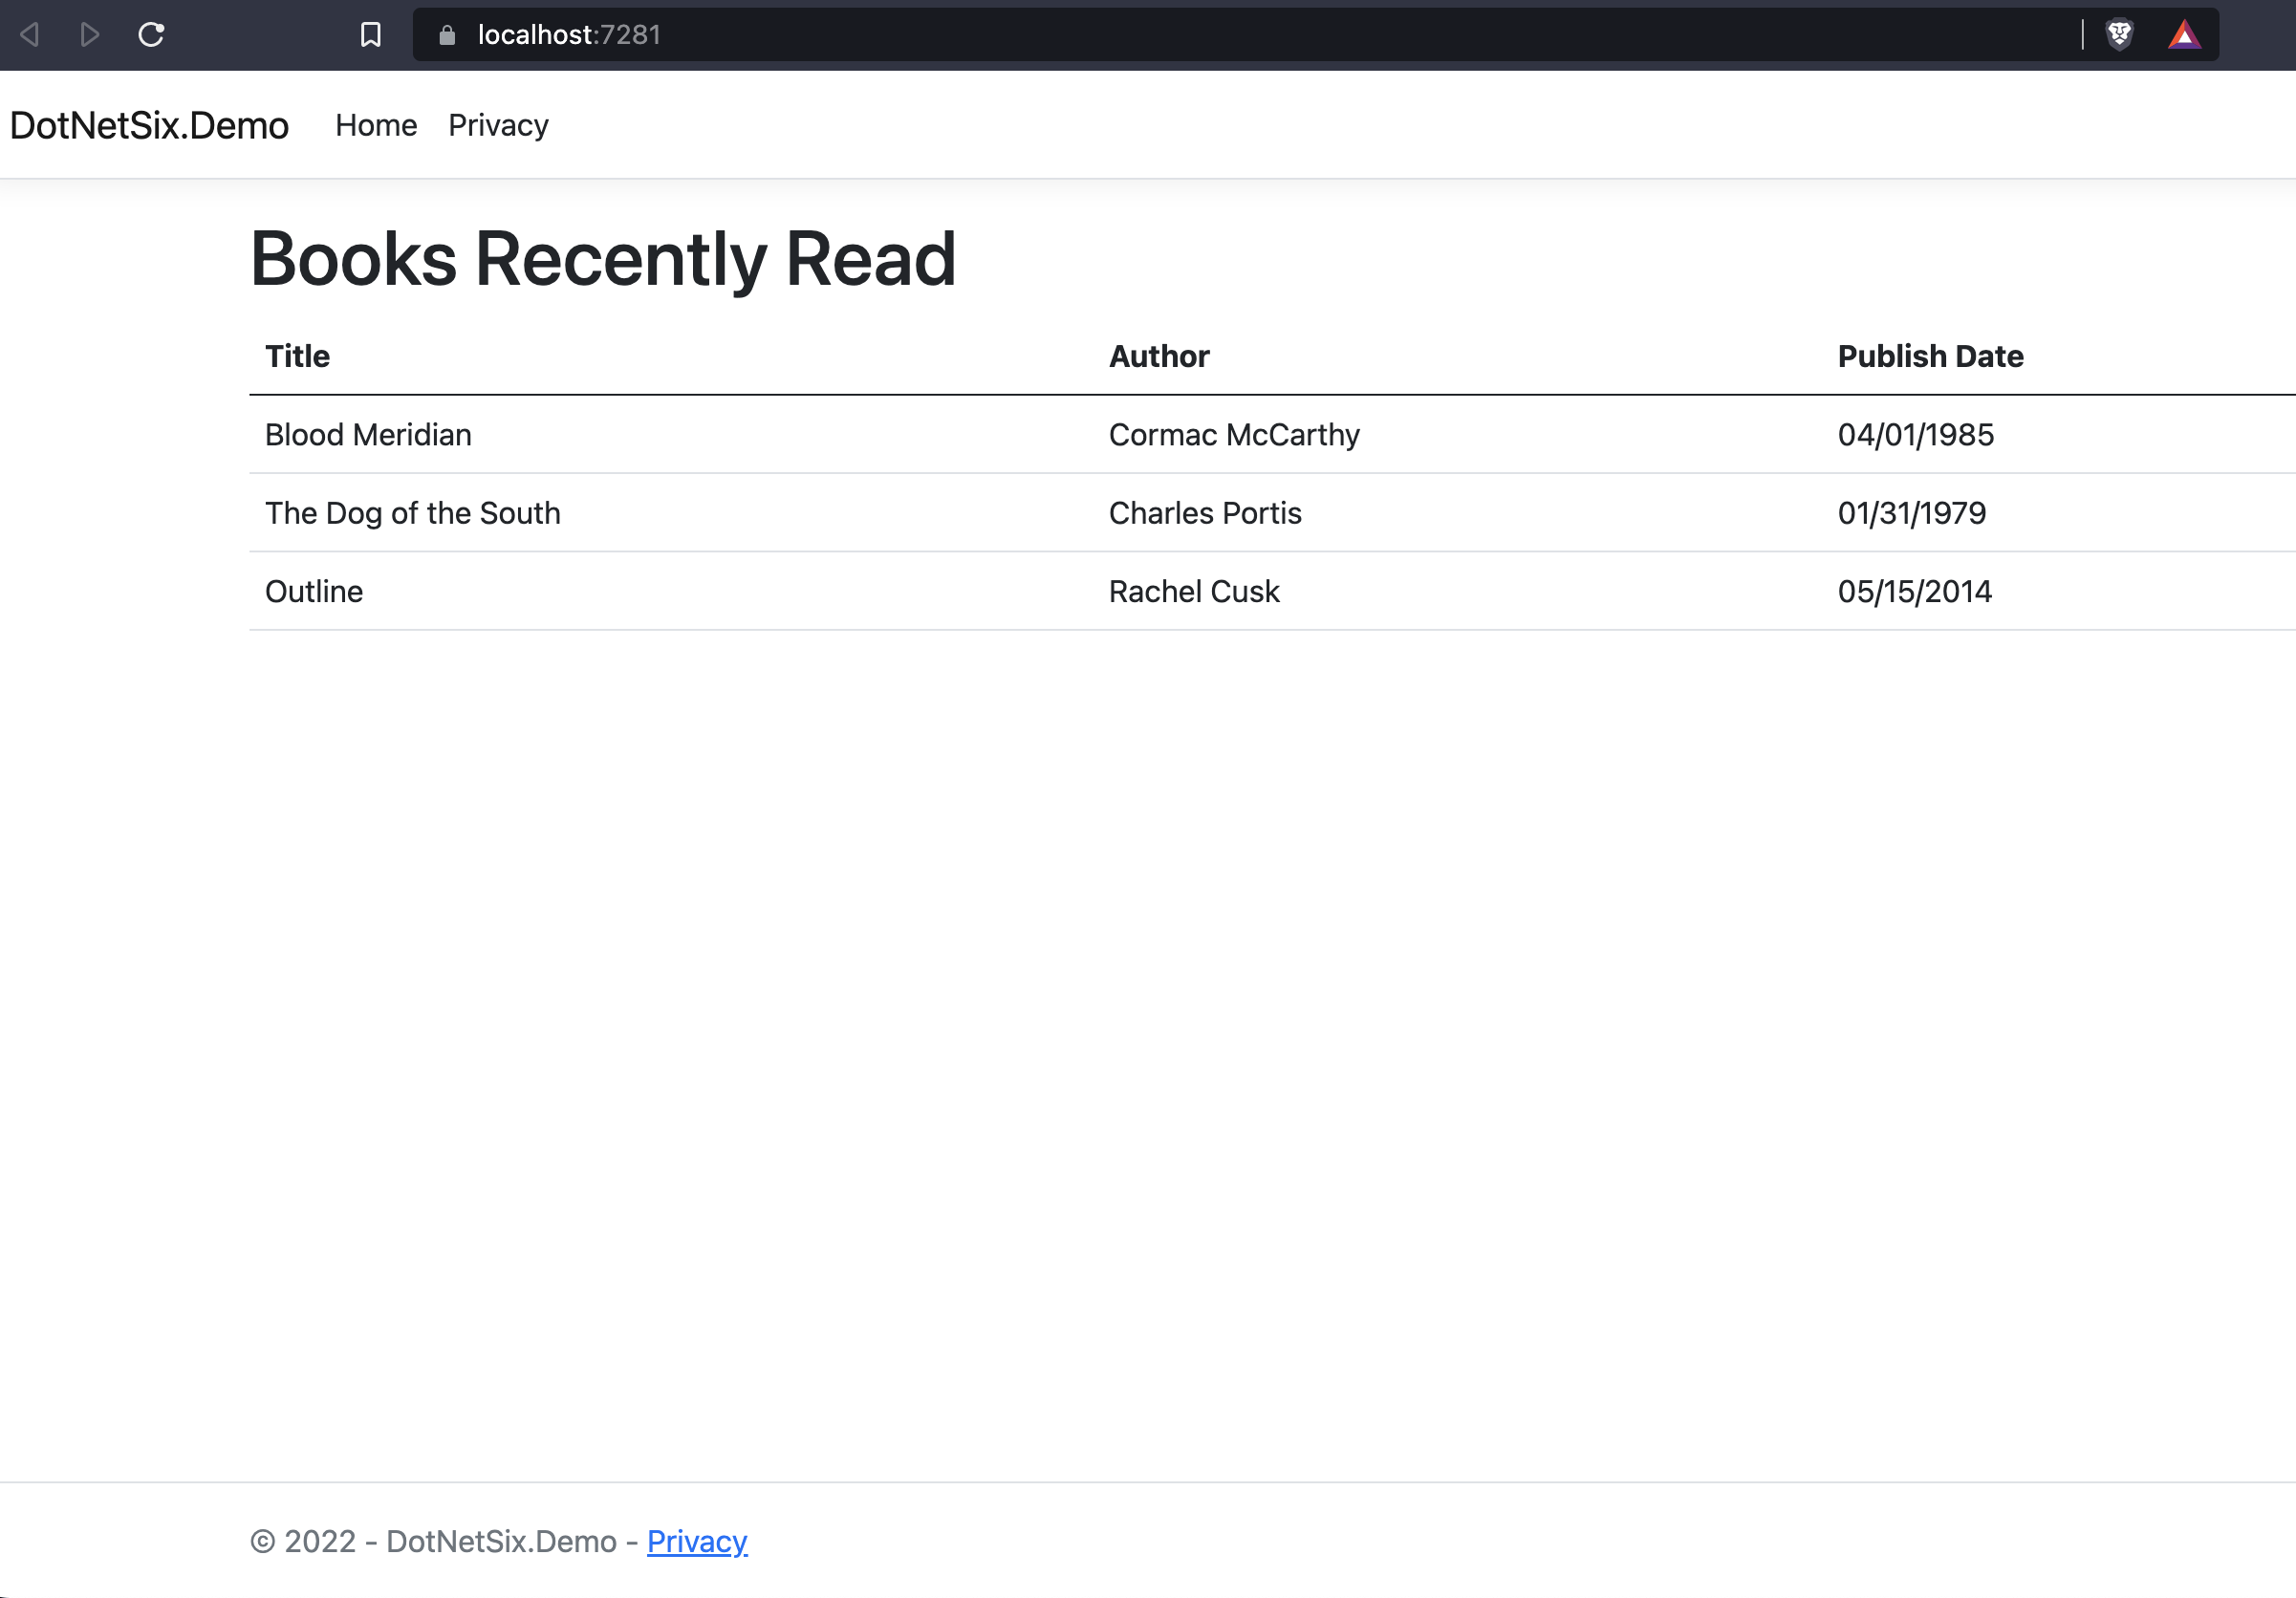 Demo page in the web browser. A new window in Brave is pointing to https://localhost:7281/ and displays a top-level navigation with our app name (DotNetsix.Demo) and Home and Privacy links. Below the navigation is a simple table displaying the book data that is saved in Postgres.